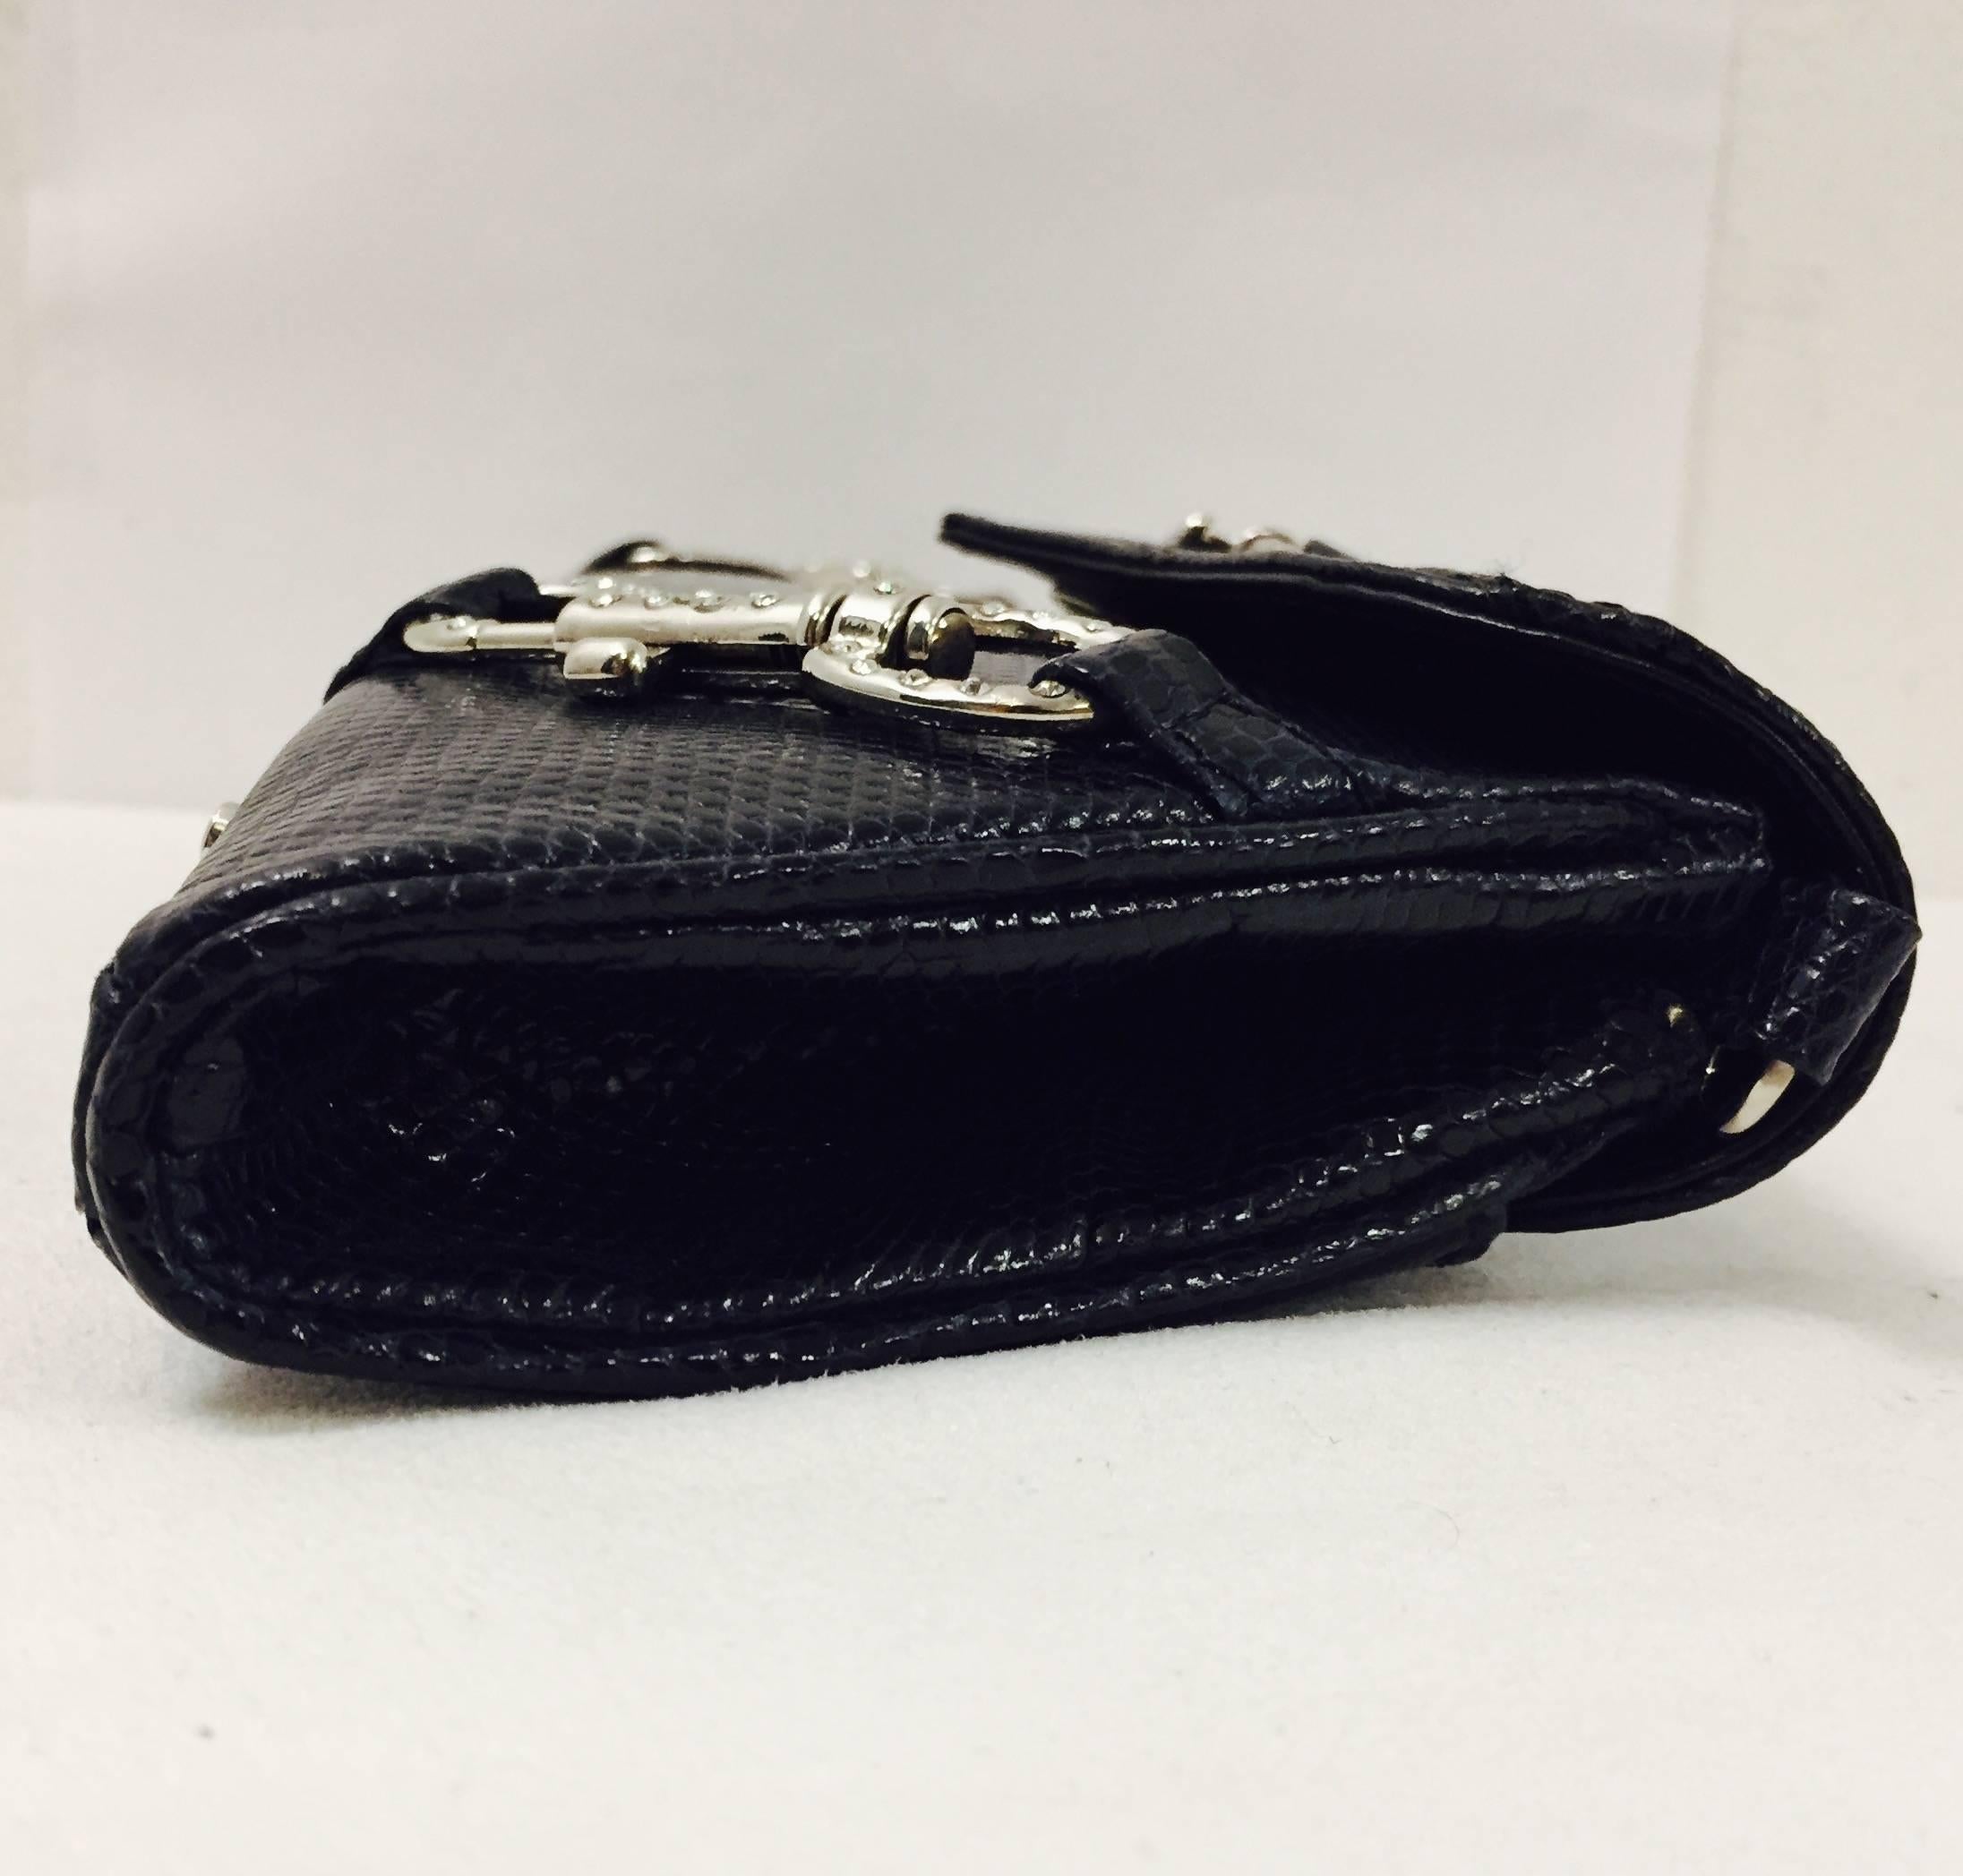 Authentic and lovely Lana Marks vintage lizard handbag/shoulder bag by Lana of London who later became well known as Lana Marks. The bag has an outside flap pocket that securely snaps for easy access. There are two handles that will comfortably fit